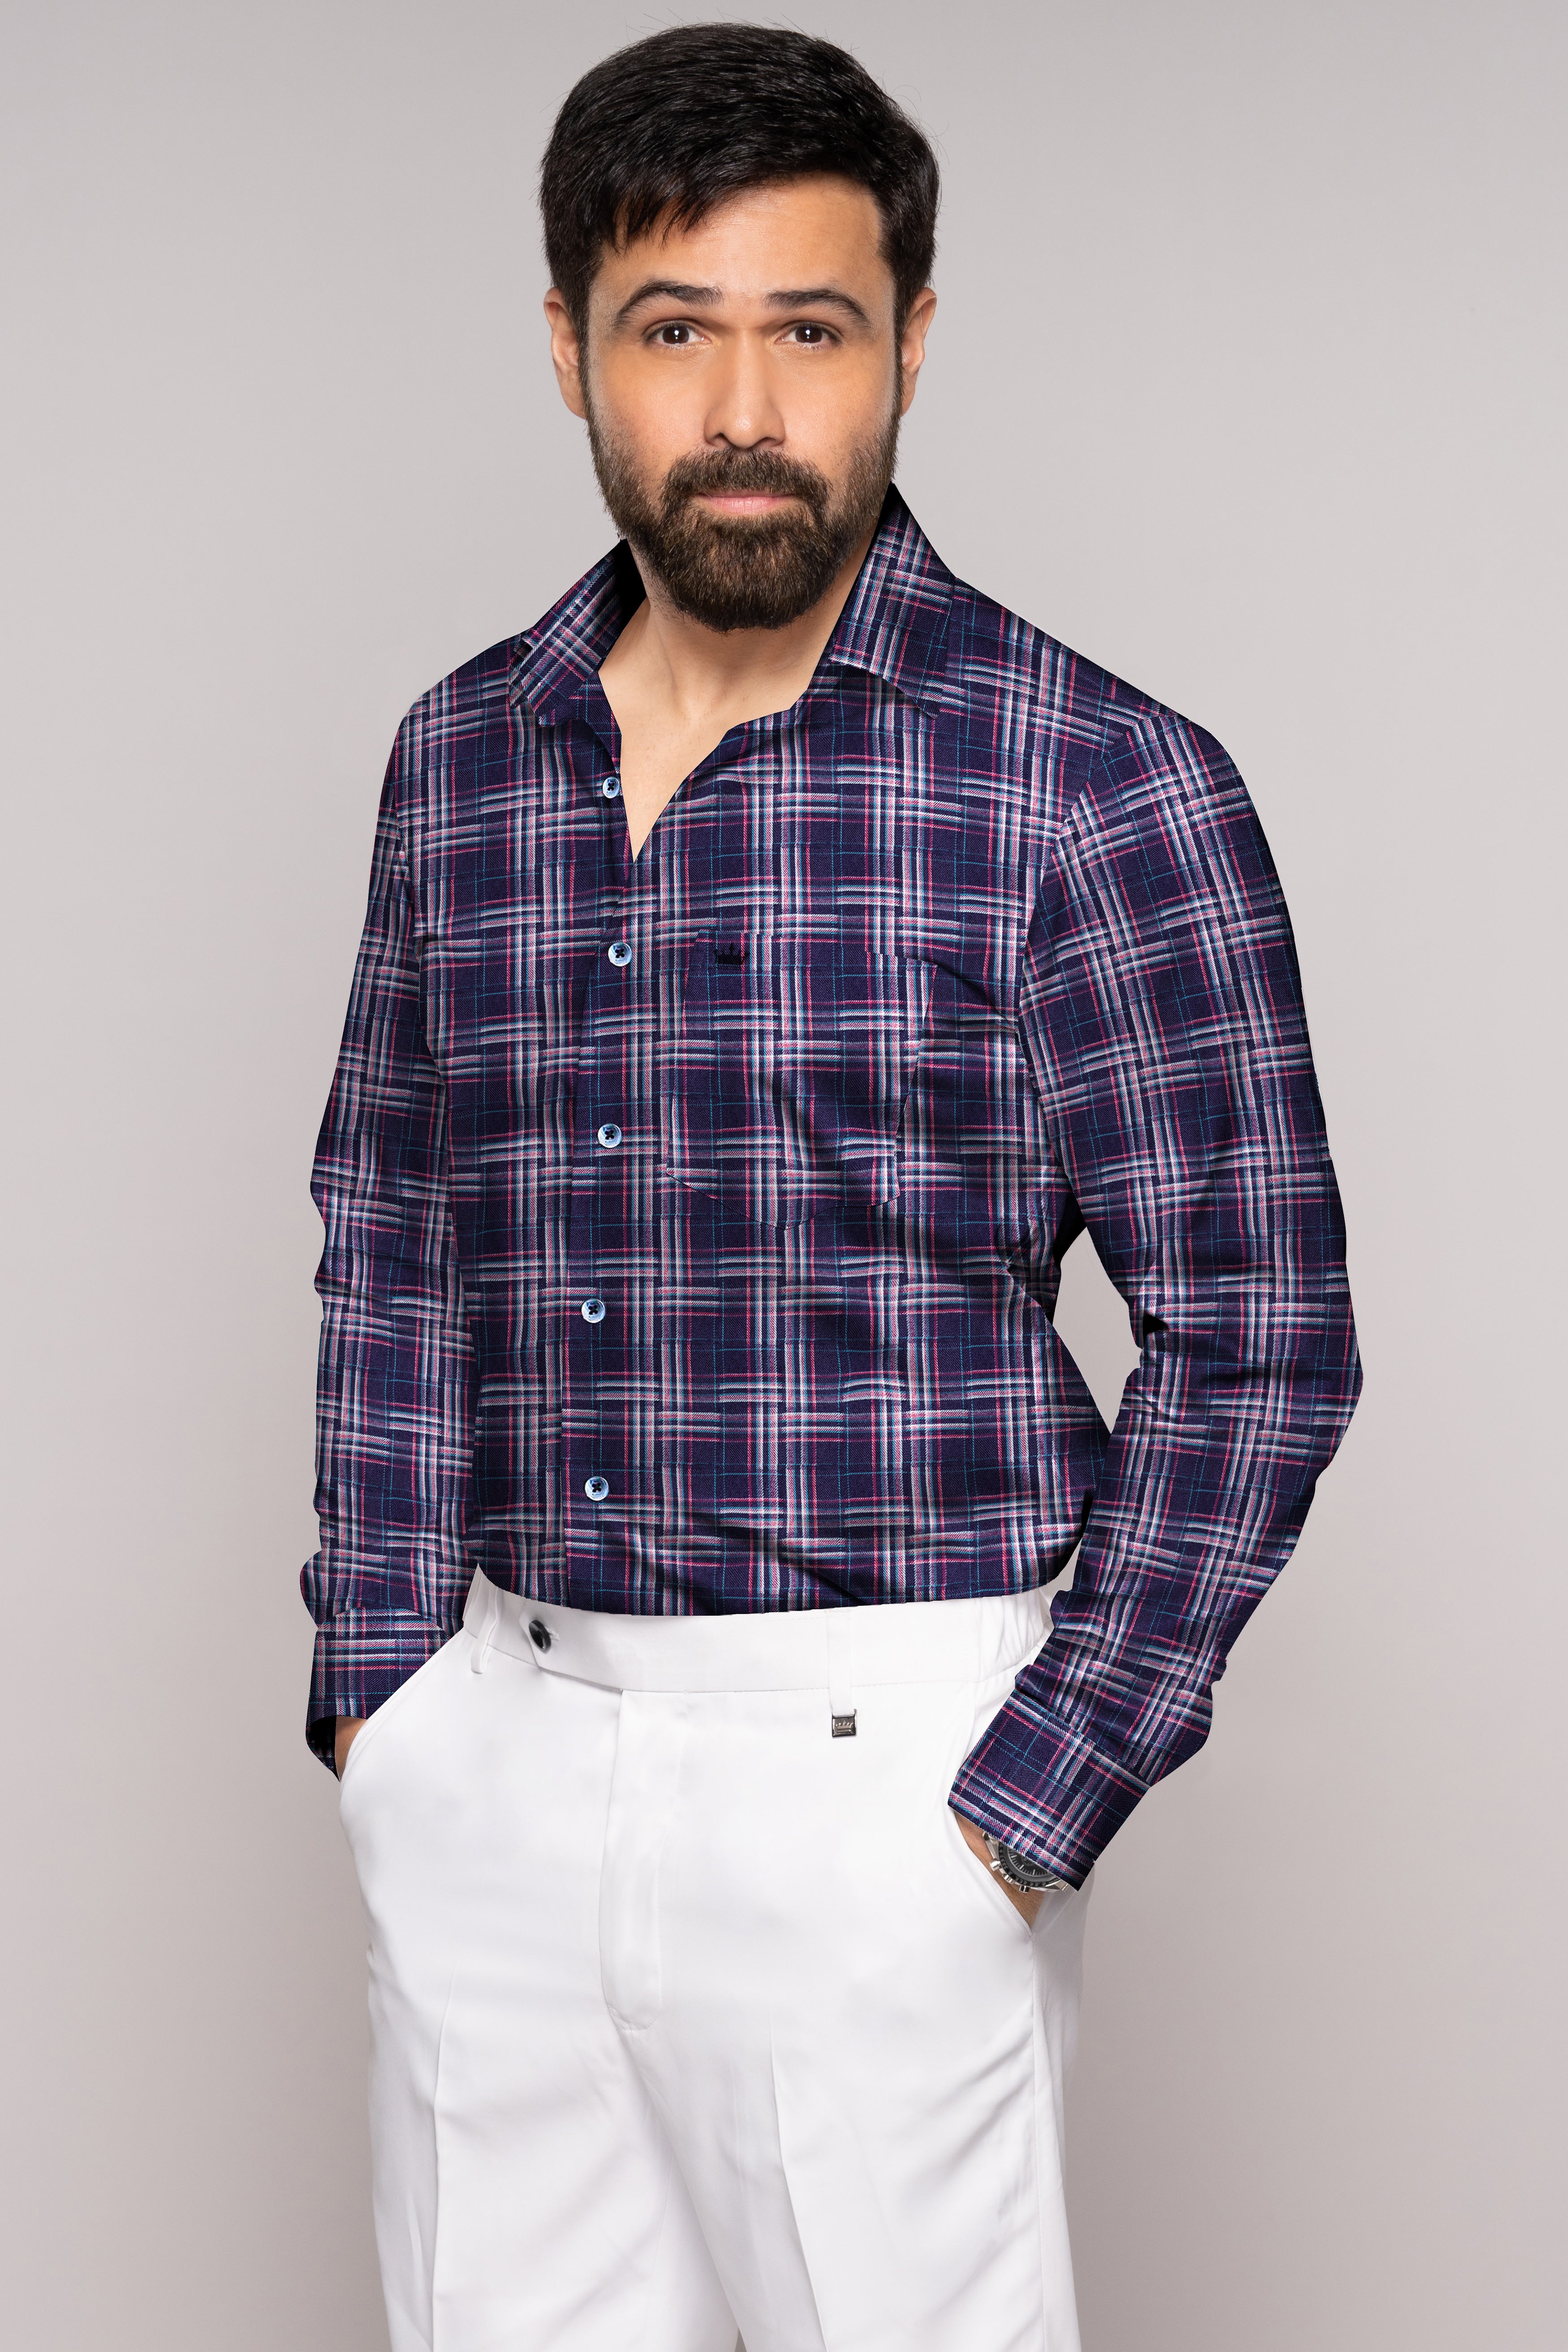 Pacific Blue and Lipstick Red Plaid Twill Textured Premium Cotton Shirt